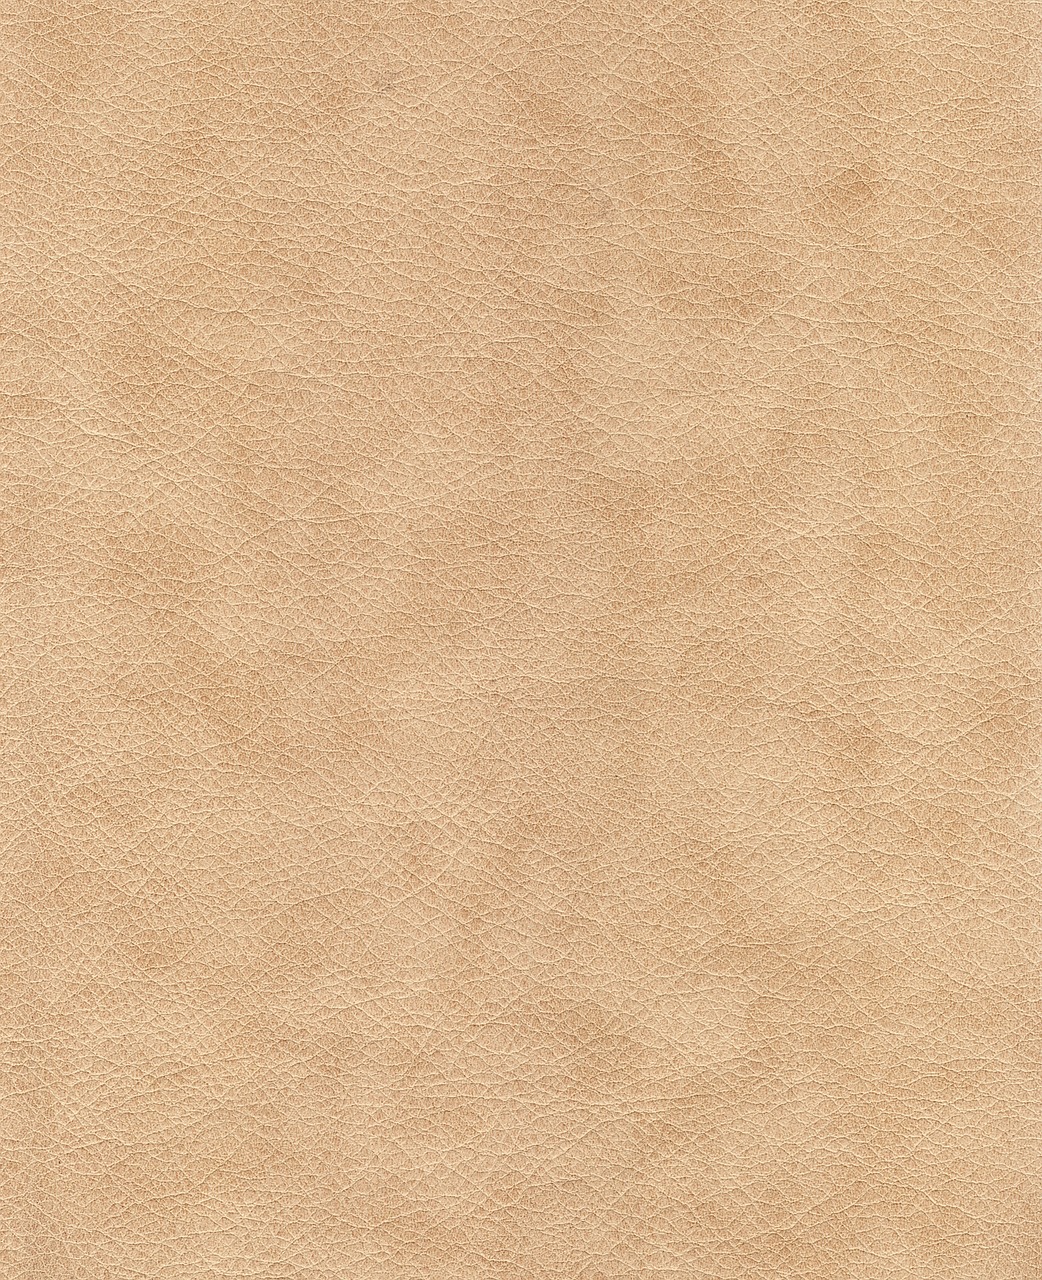 leather textures background free photo